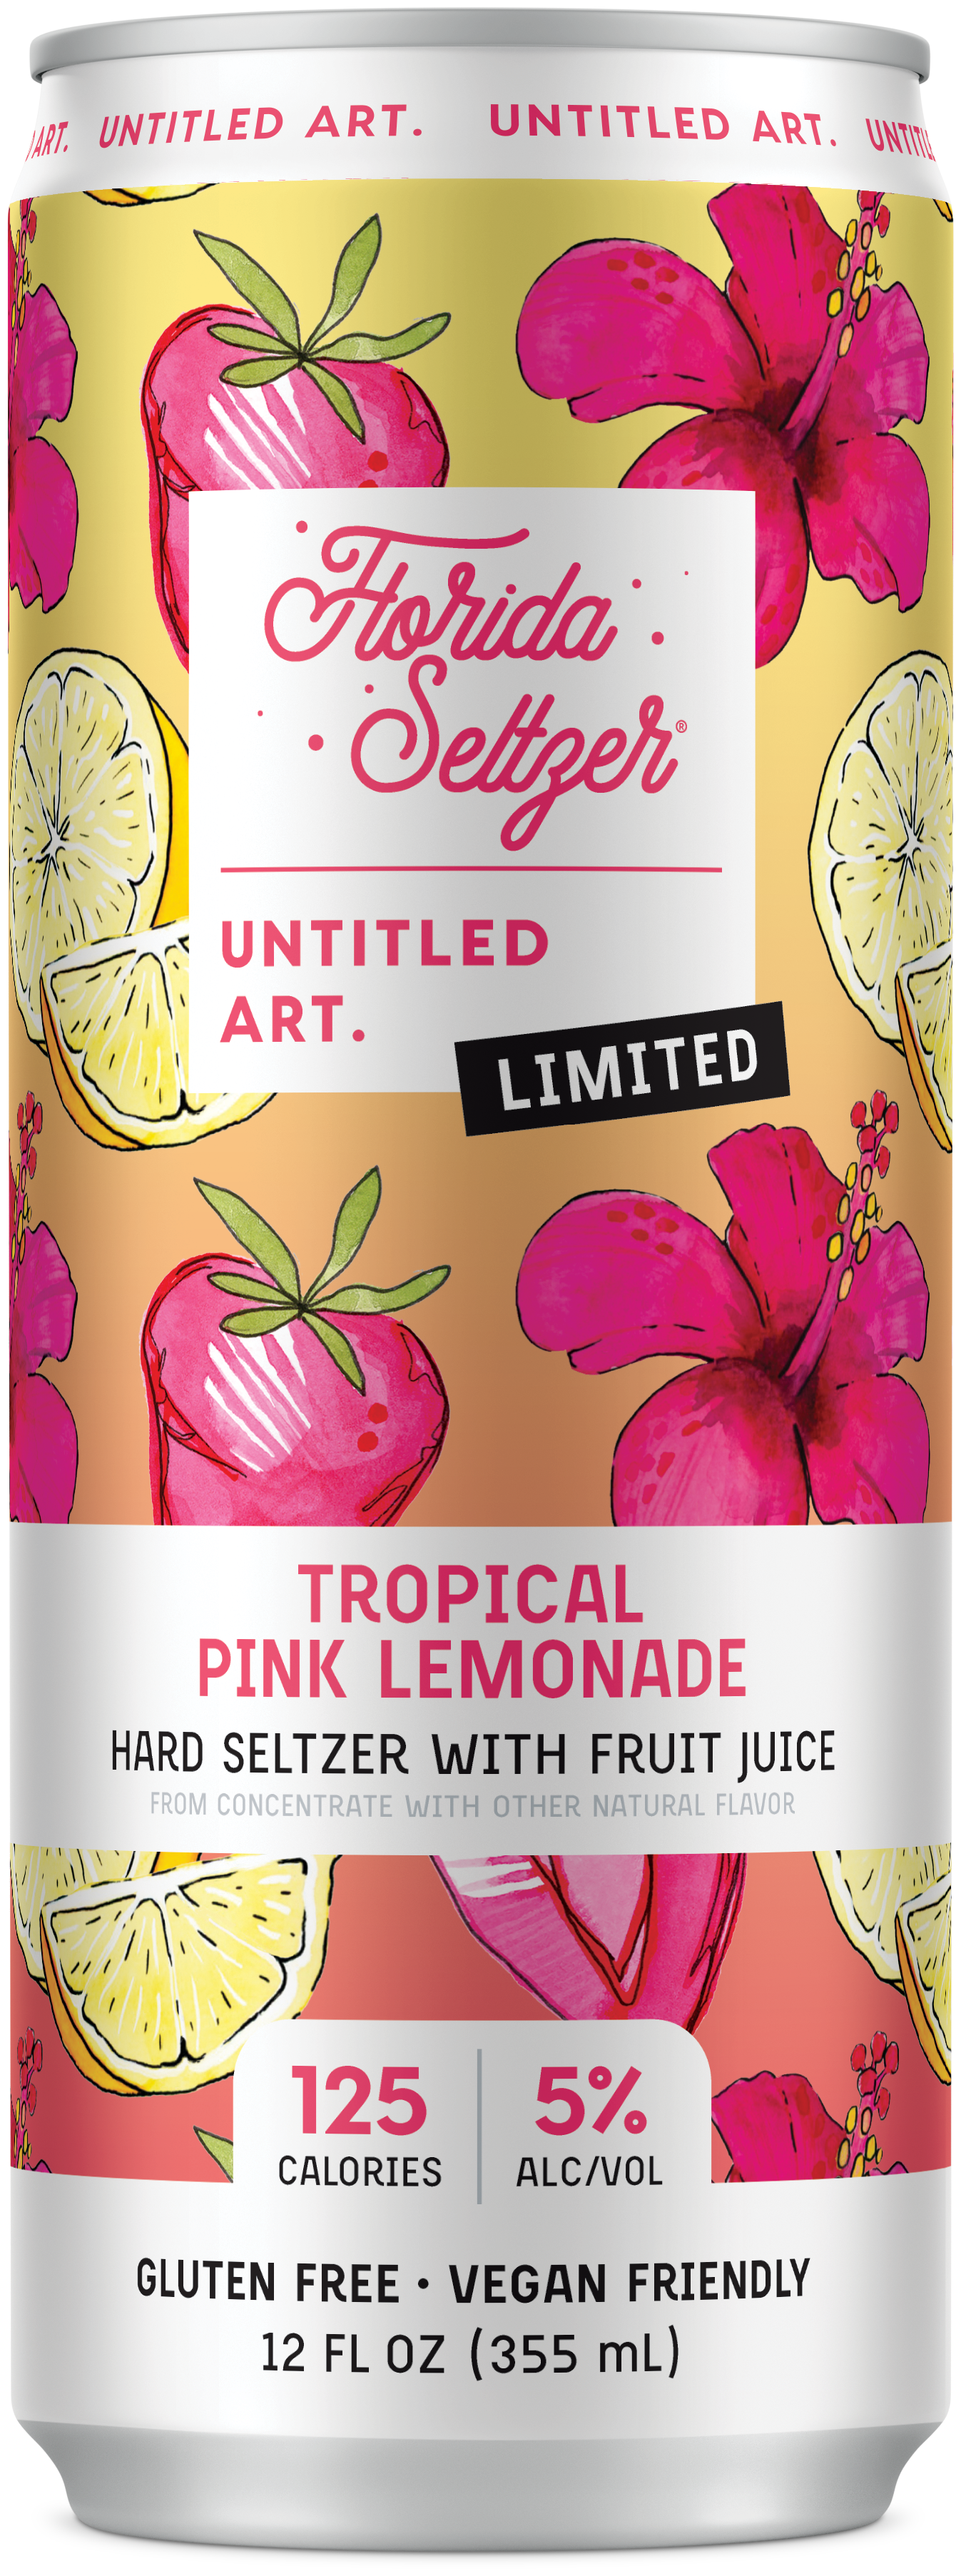 A can of tropical pink lemonade.